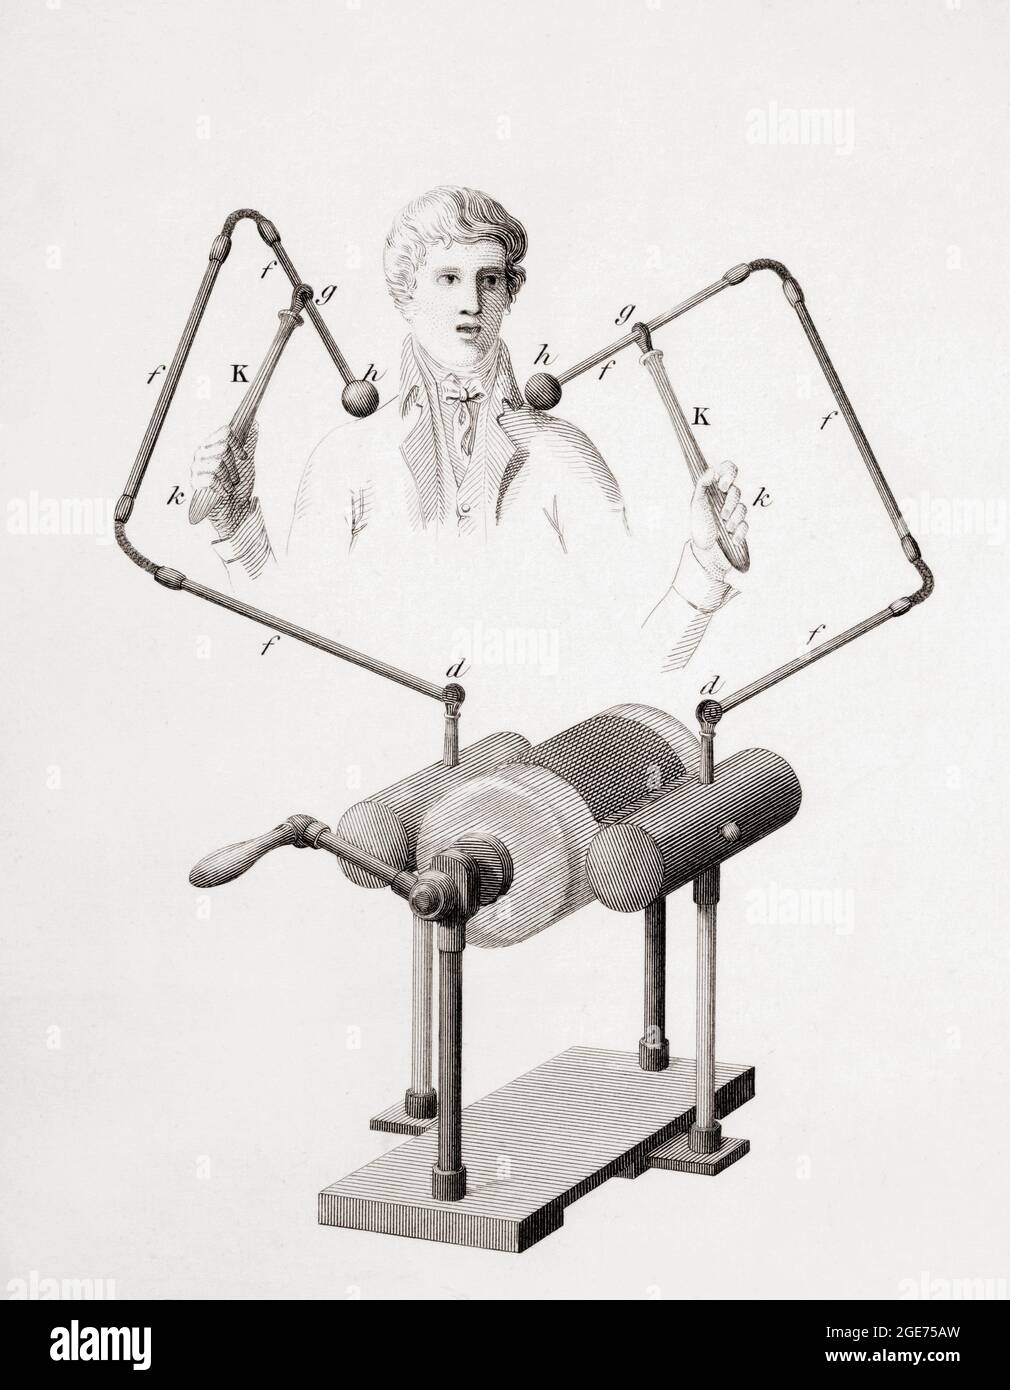 Early 19th century experiment with electricity on the human body.  From The Cyclopaedia or Universal Dictionary of Arts, Sciences and Literature by Abraham Rees, published London 1820. Stock Photo